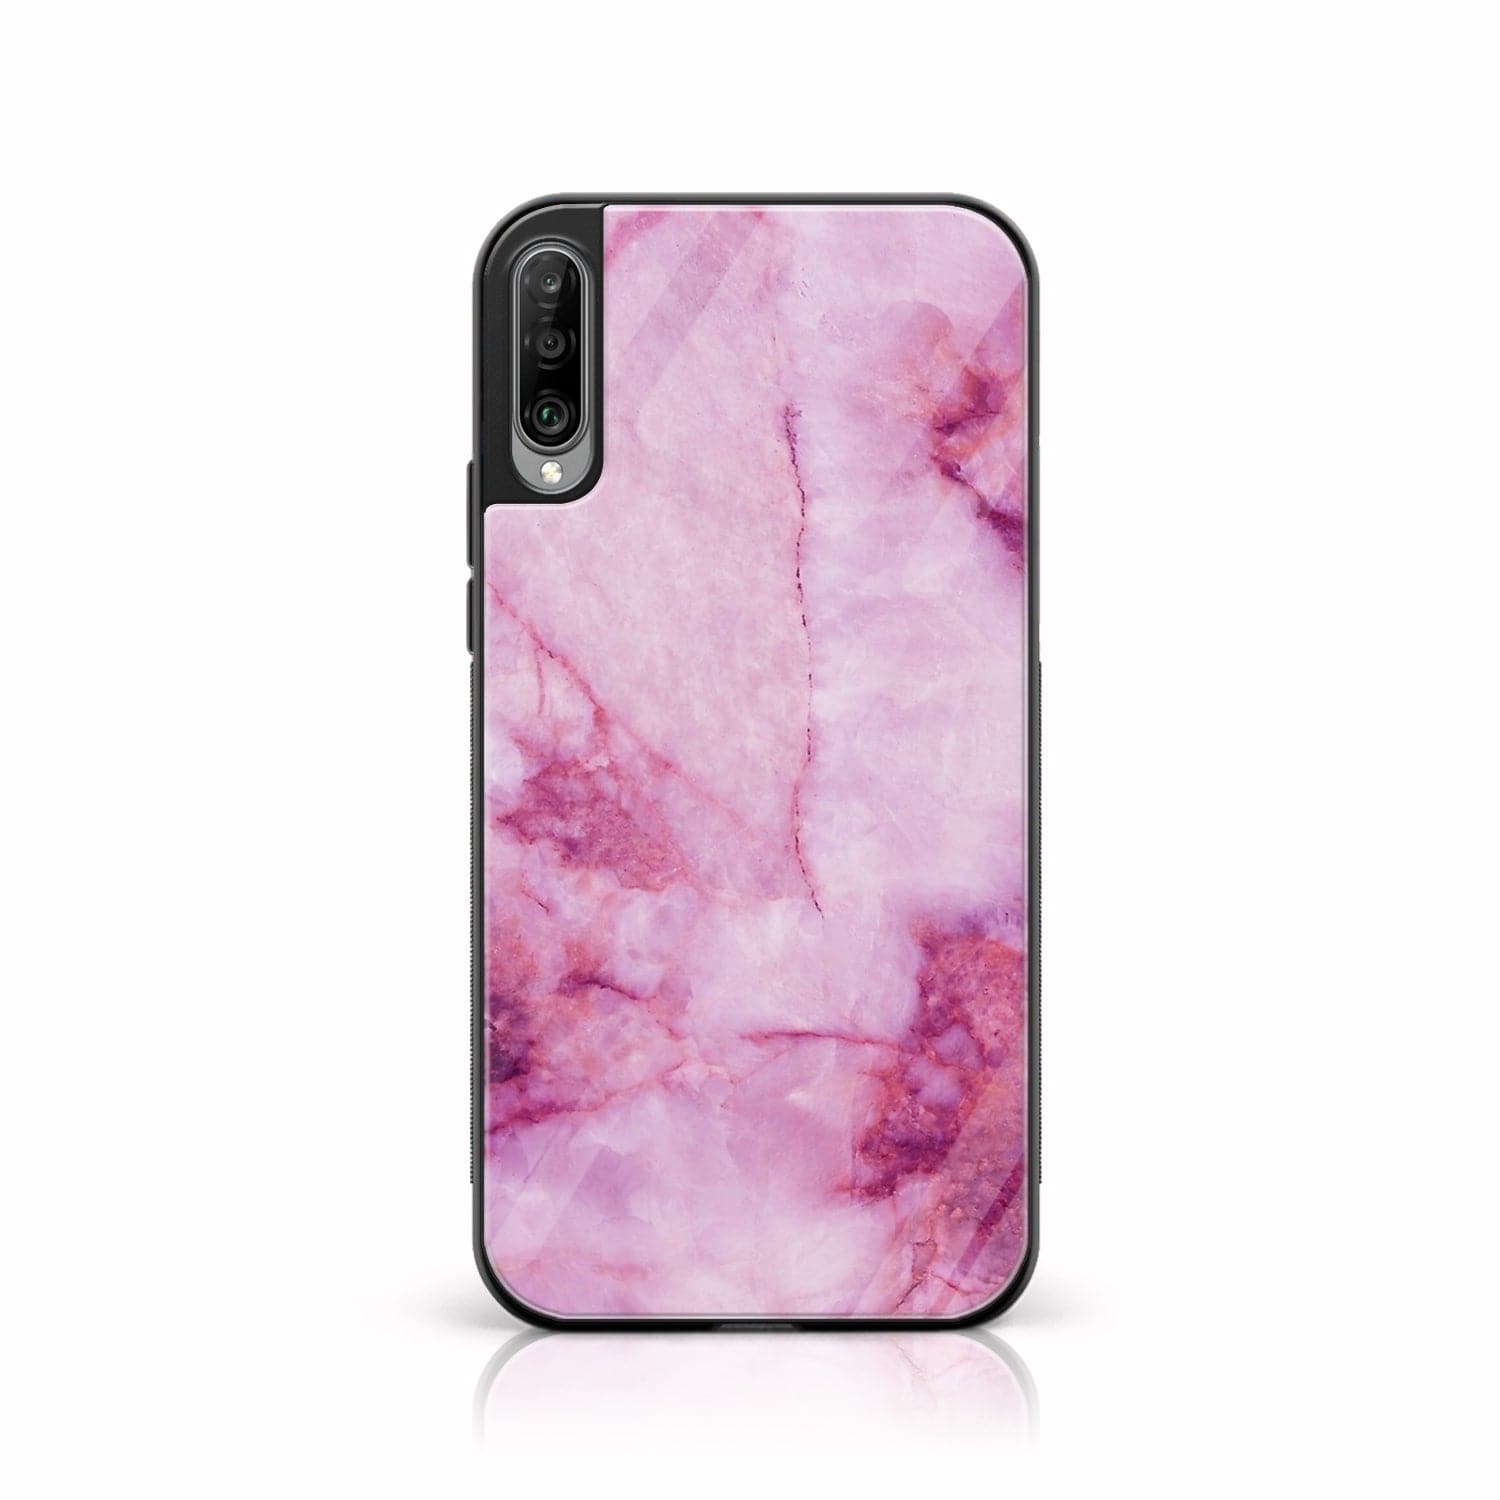 Galaxy A50/ A50s/ A30s - Pink Marble Series - Premium Printed Glass soft Bumper shock Proof Case